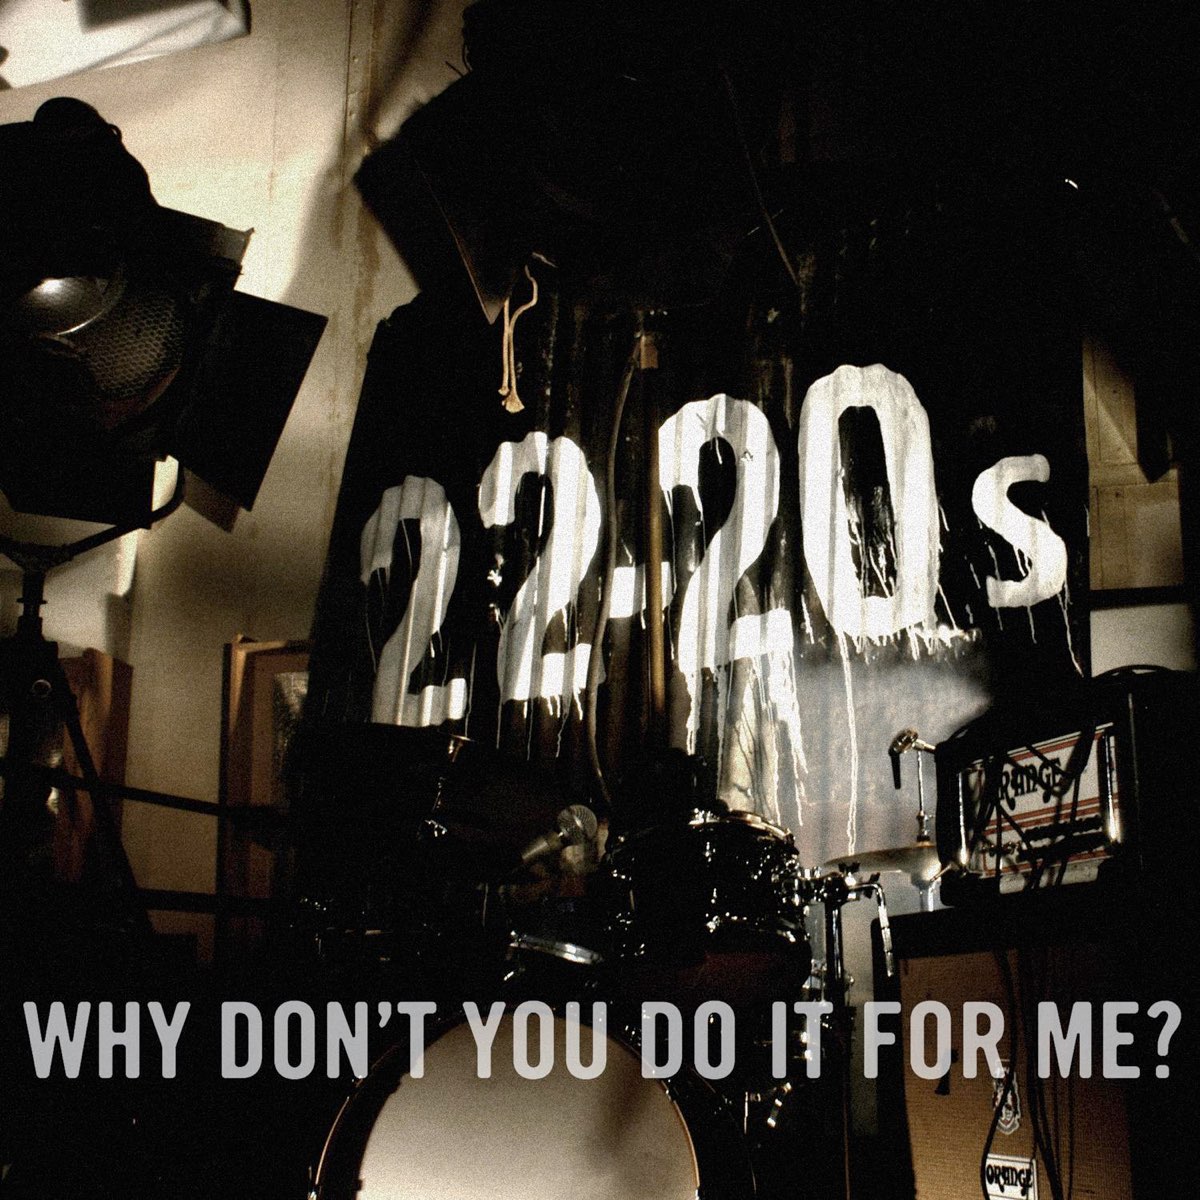 Музыка из 20 22. Why don't you текст. Песня why don't you. 20*22 Альбом. Skold - don't Pray for me фото.